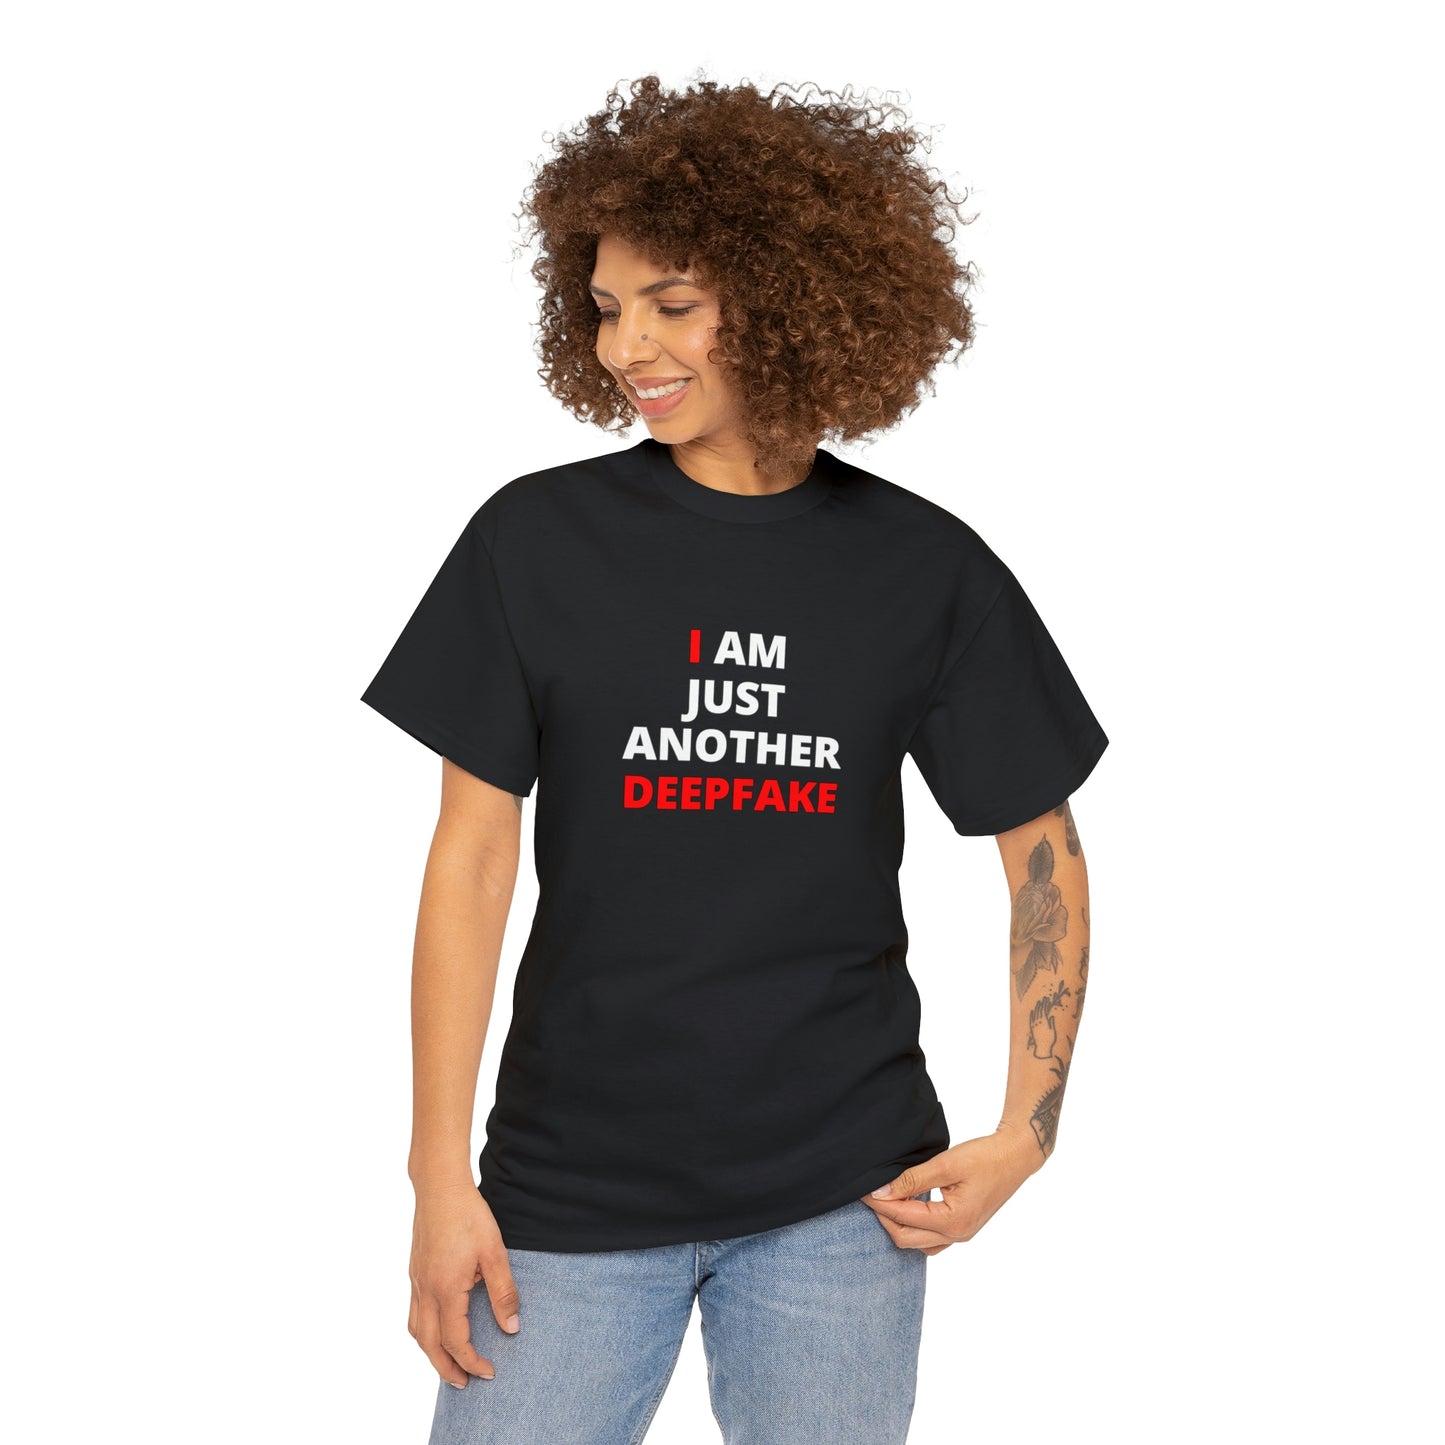 "I AM JUST ANOTHER DEEPFAKE" Blk or Wte Unisex Heavy Cotton Tee